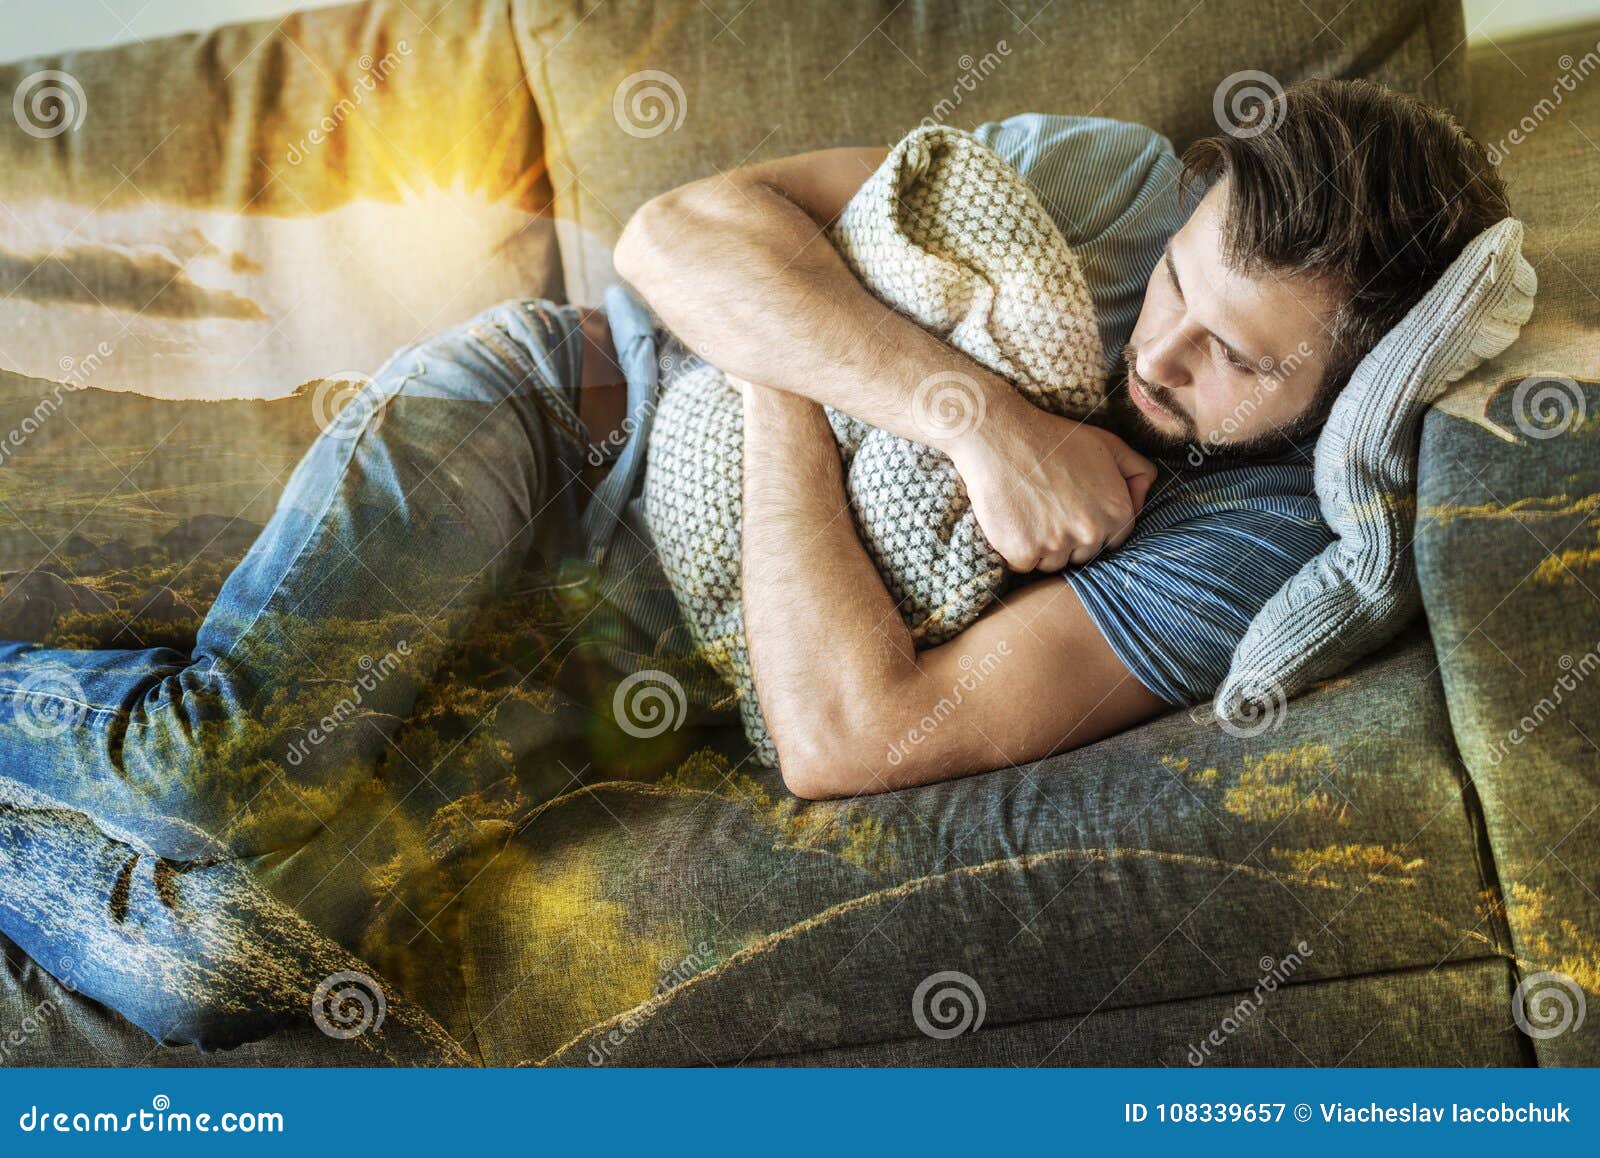 Depressed Exhausted Man Looking Aside and Hugging the Pillow ...